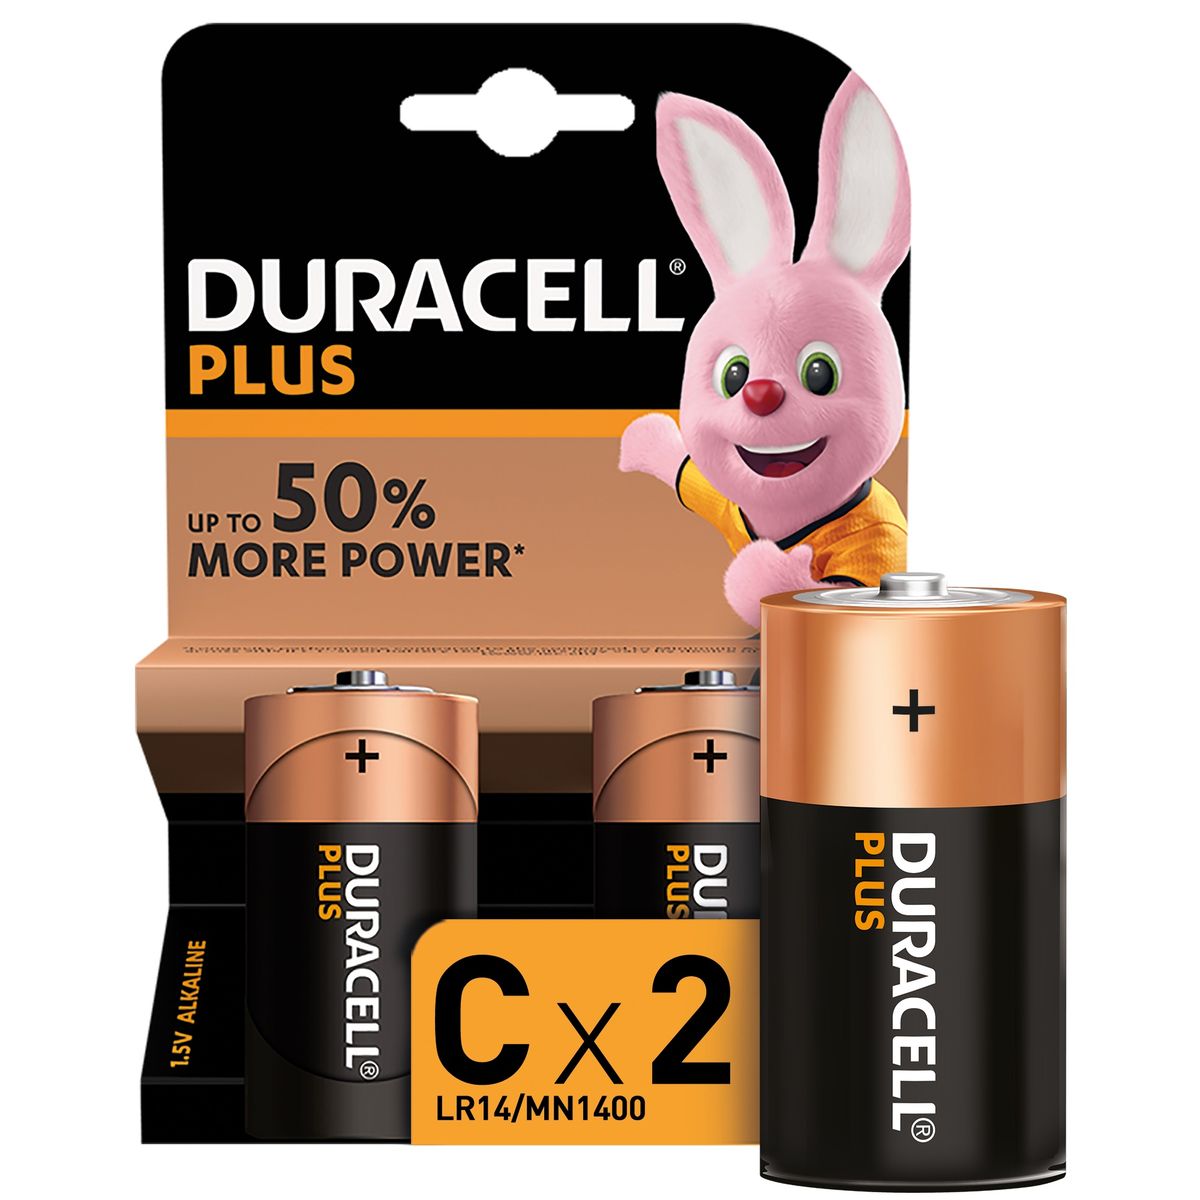 Duracell Plus C Alkaline Batteries, 1.5V LR14 MN1400 - 2 Pack, Shop Today.  Get it Tomorrow!